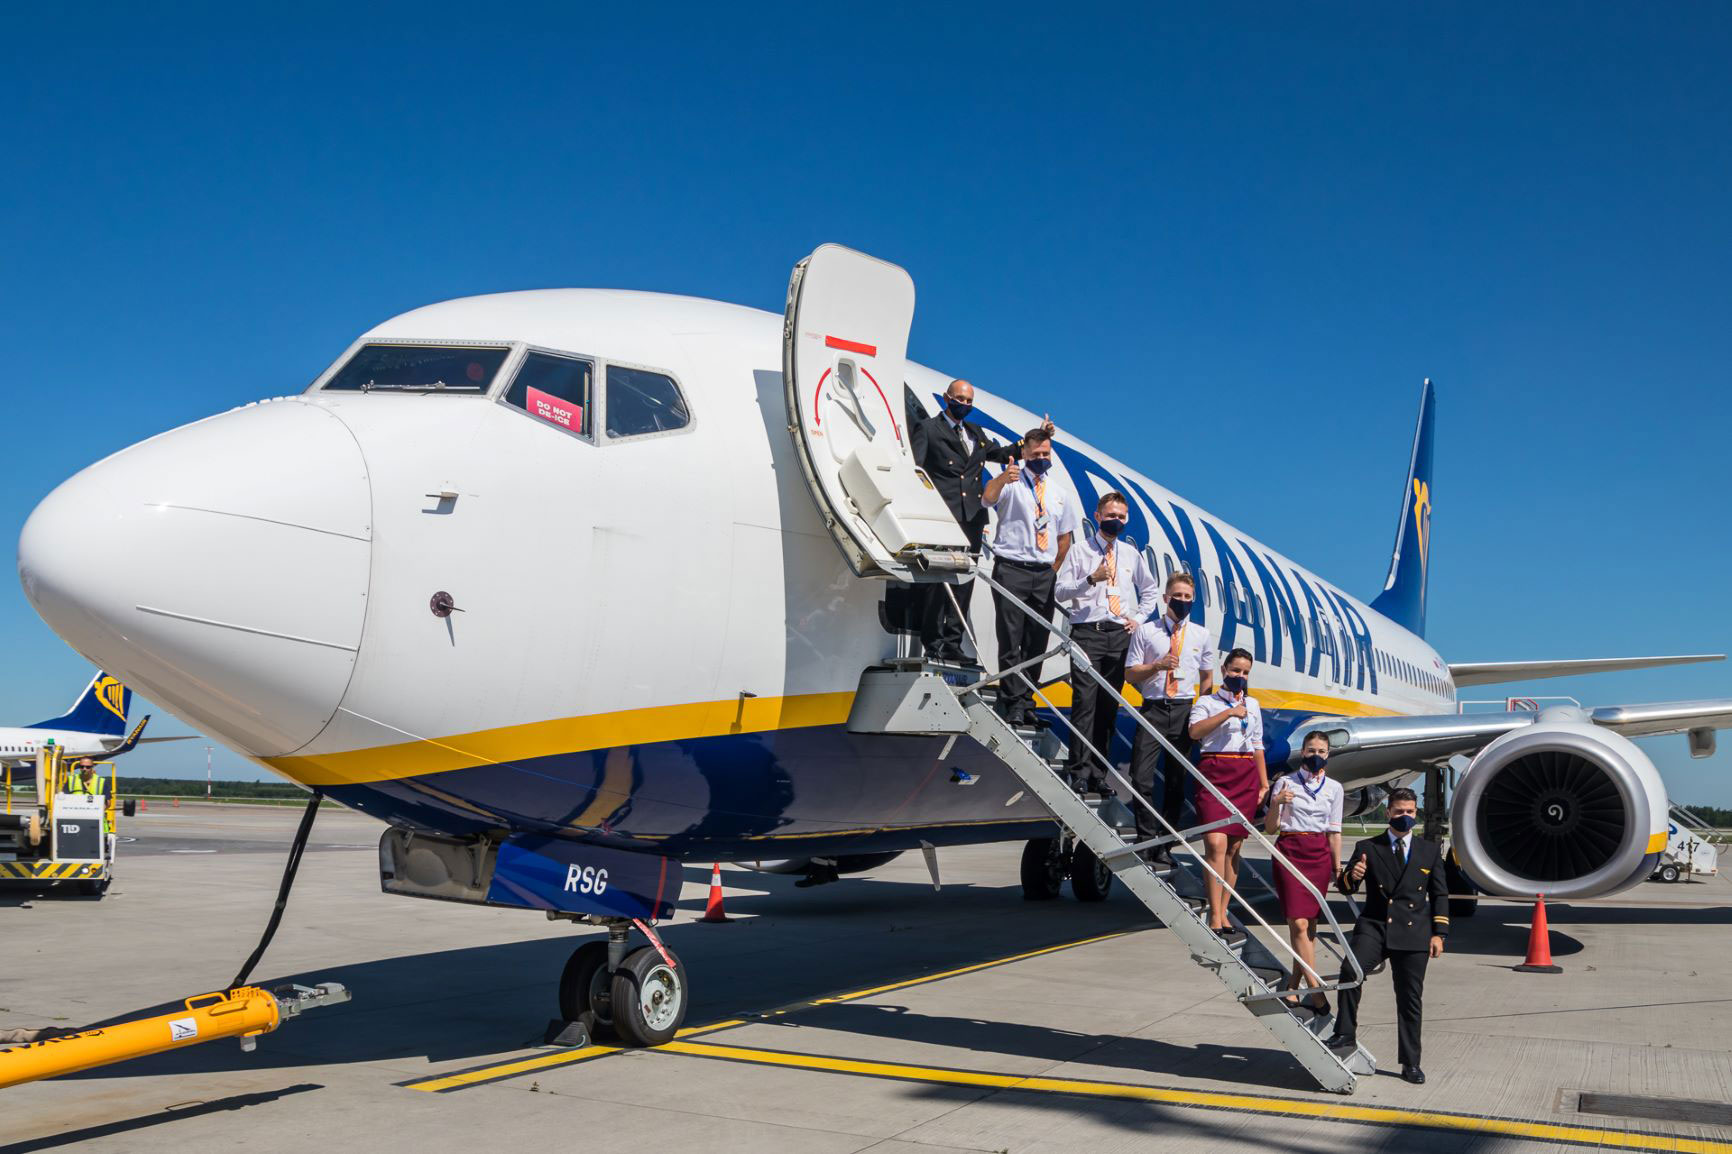 RYANAIR RESUMES OPERATIONS FROM ZADAR, 10 ROUTES ON SALE